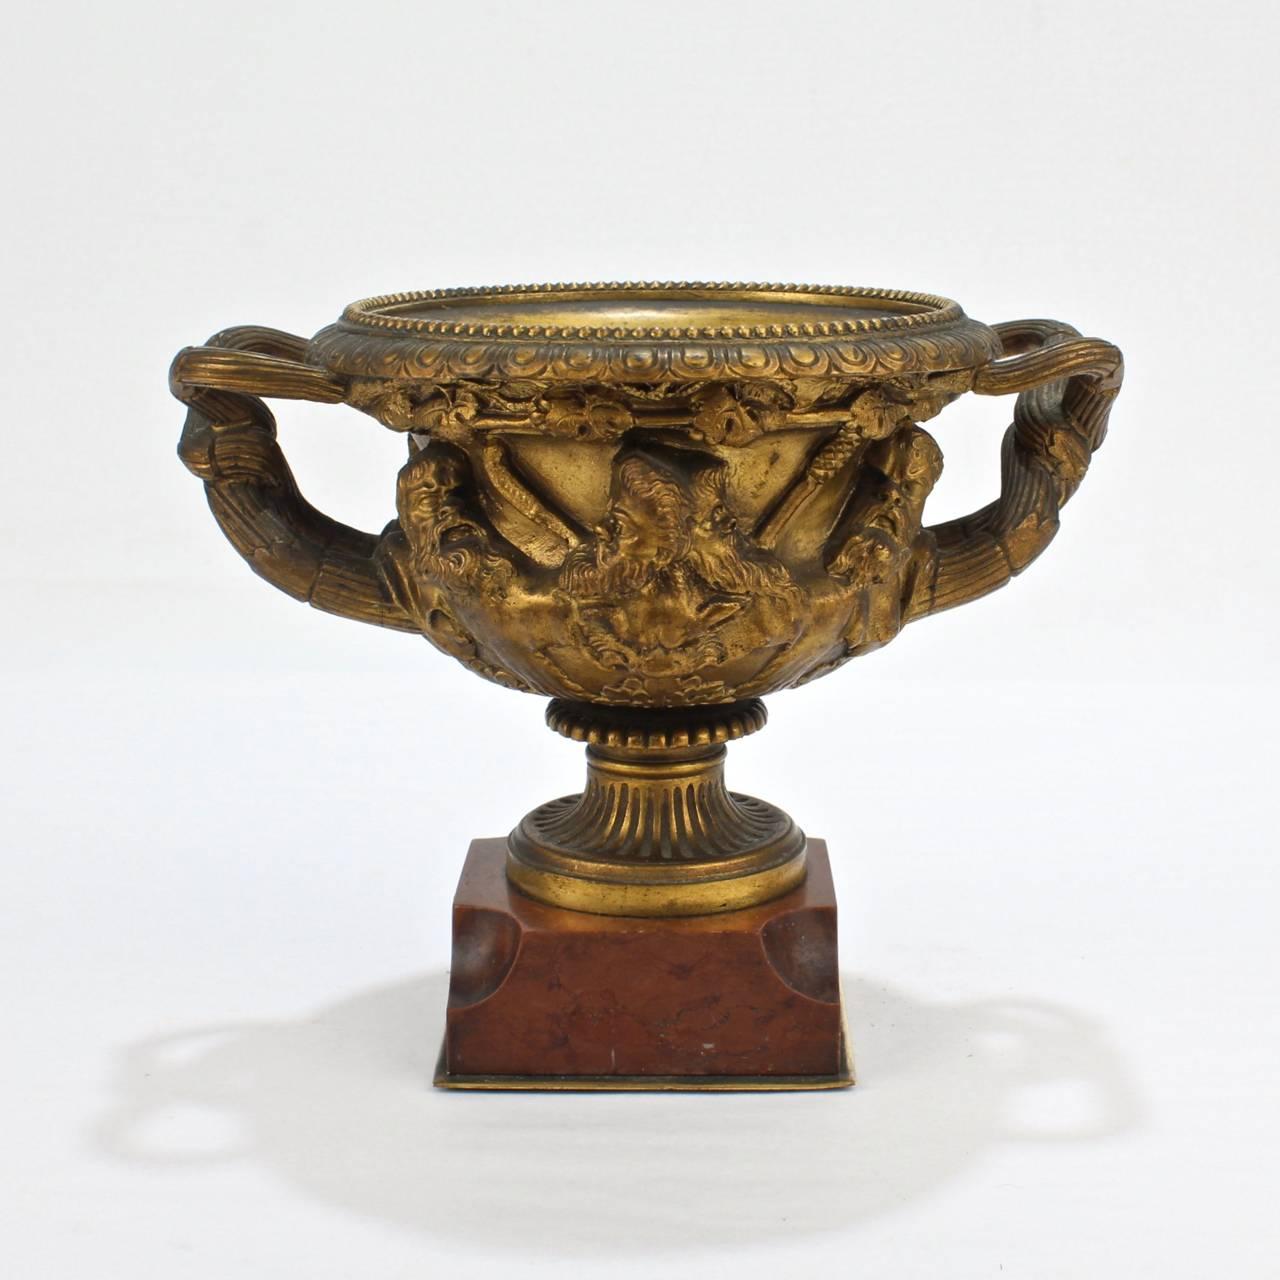 A diminutive, cabinet size gilt bronze Warwick vase.

The twin handled urn form vase is perfectly scaled for the desk or curio cabinet.

This vase is modeled after the ancient marble vase discovered in Hadrian's Villa, which is now housed in the